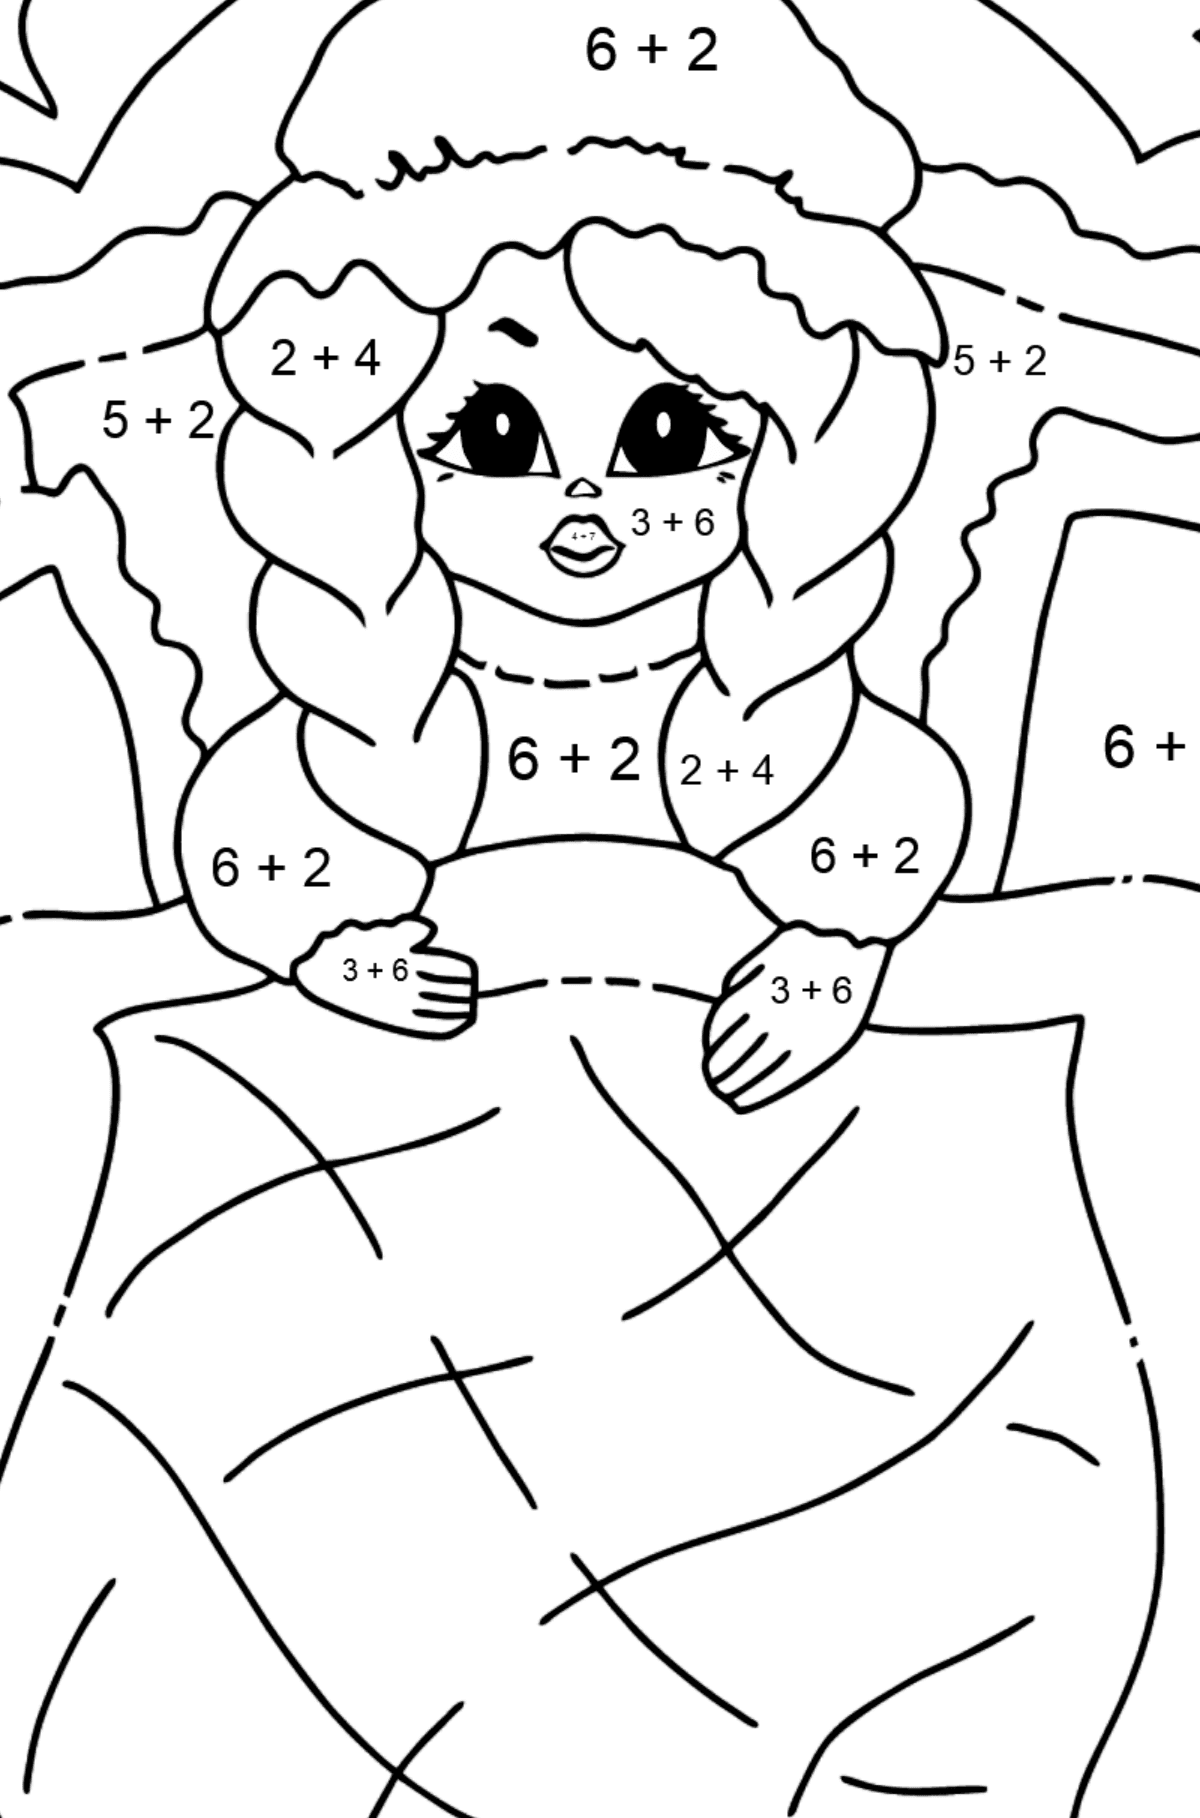 Coloring Picture - A Princess in Bed - Math Coloring - Addition for Kids